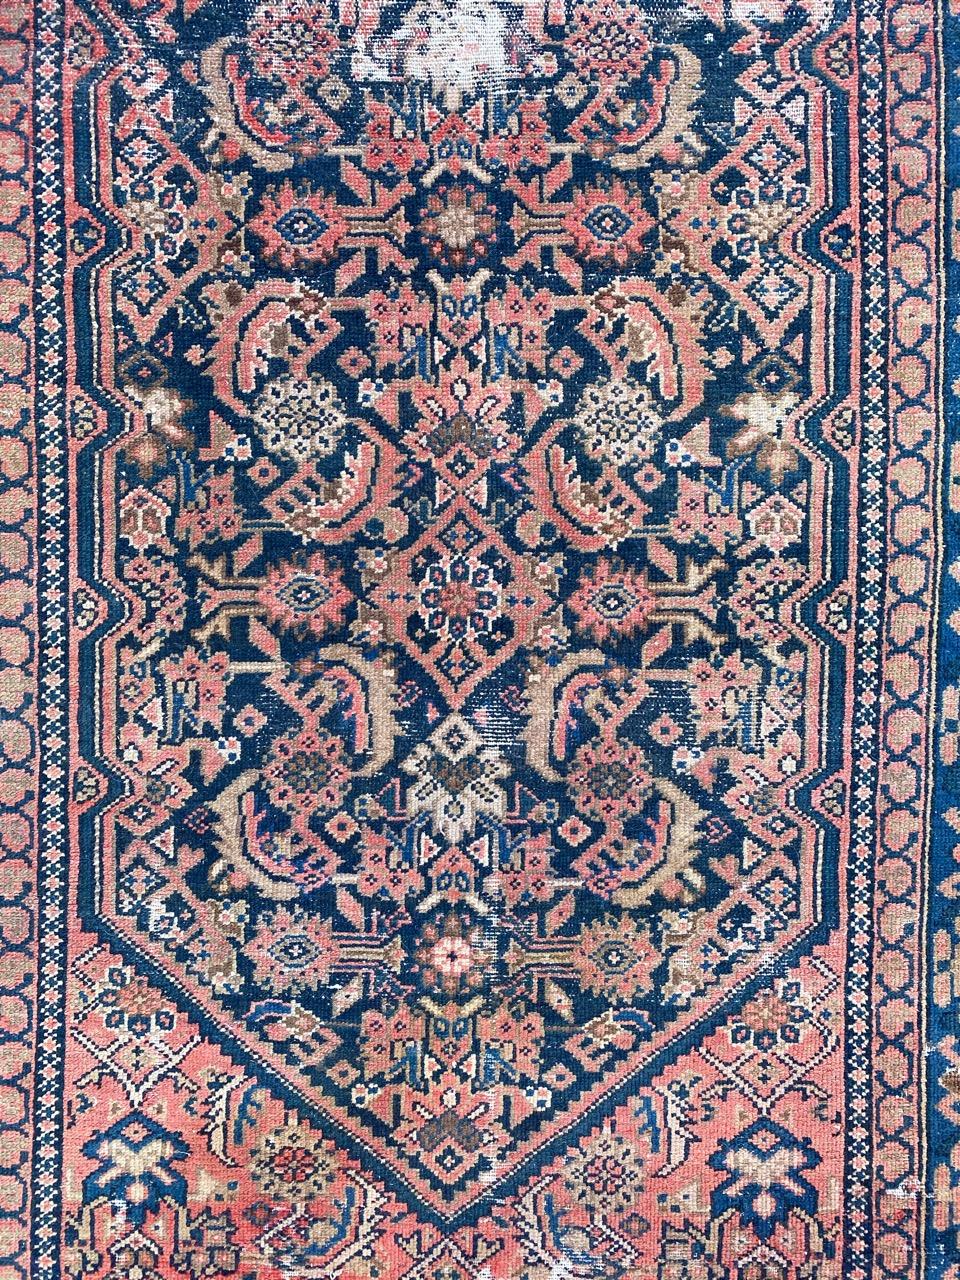 Beautiful late 19th century rug with a Herati design and beautiful natural colors, entirely hand knotted with wool velvet on cotton foundation.